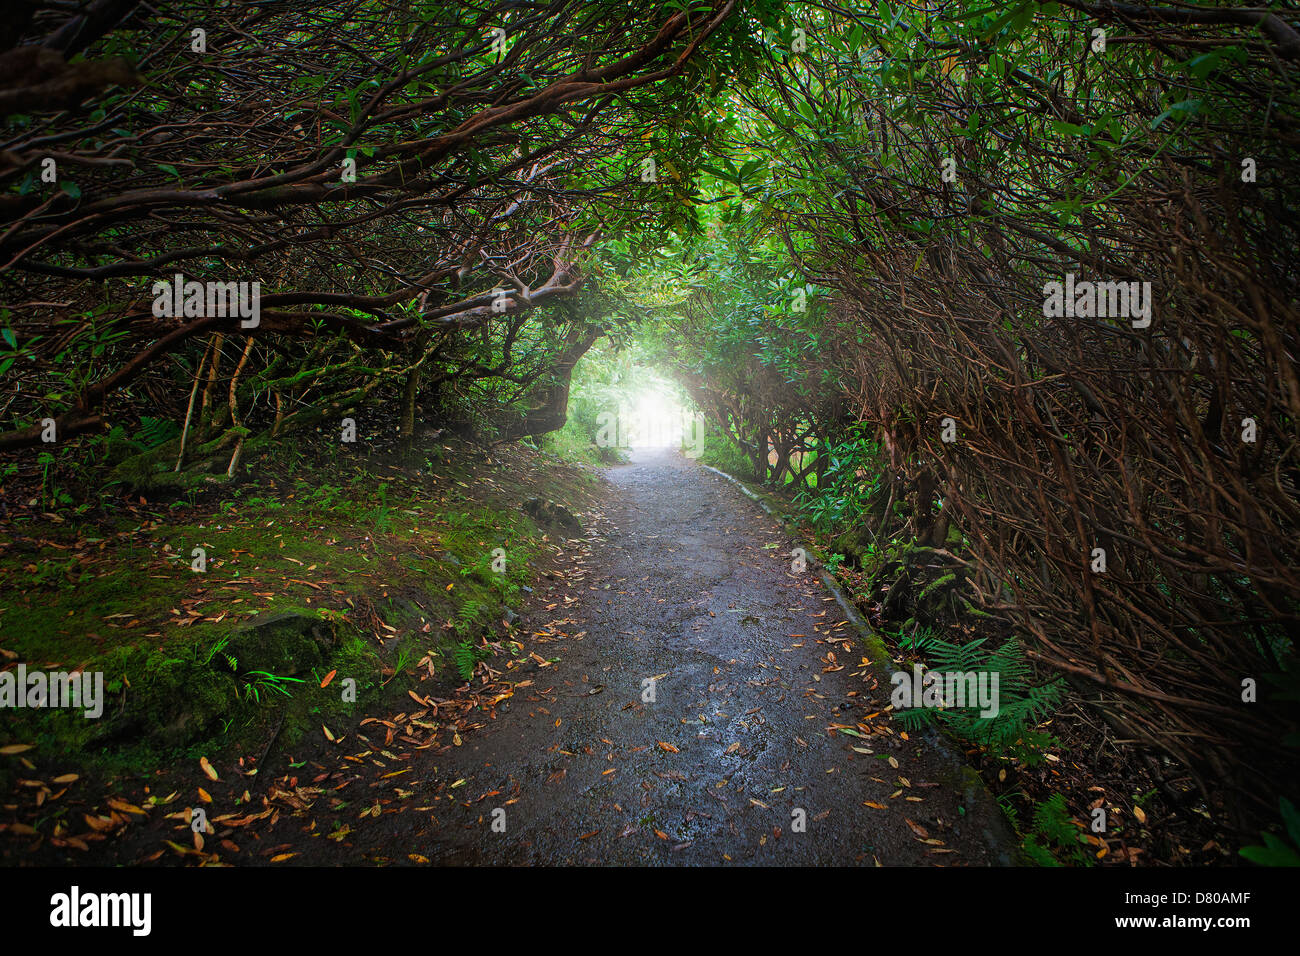 Paved road in forest Stock Photo